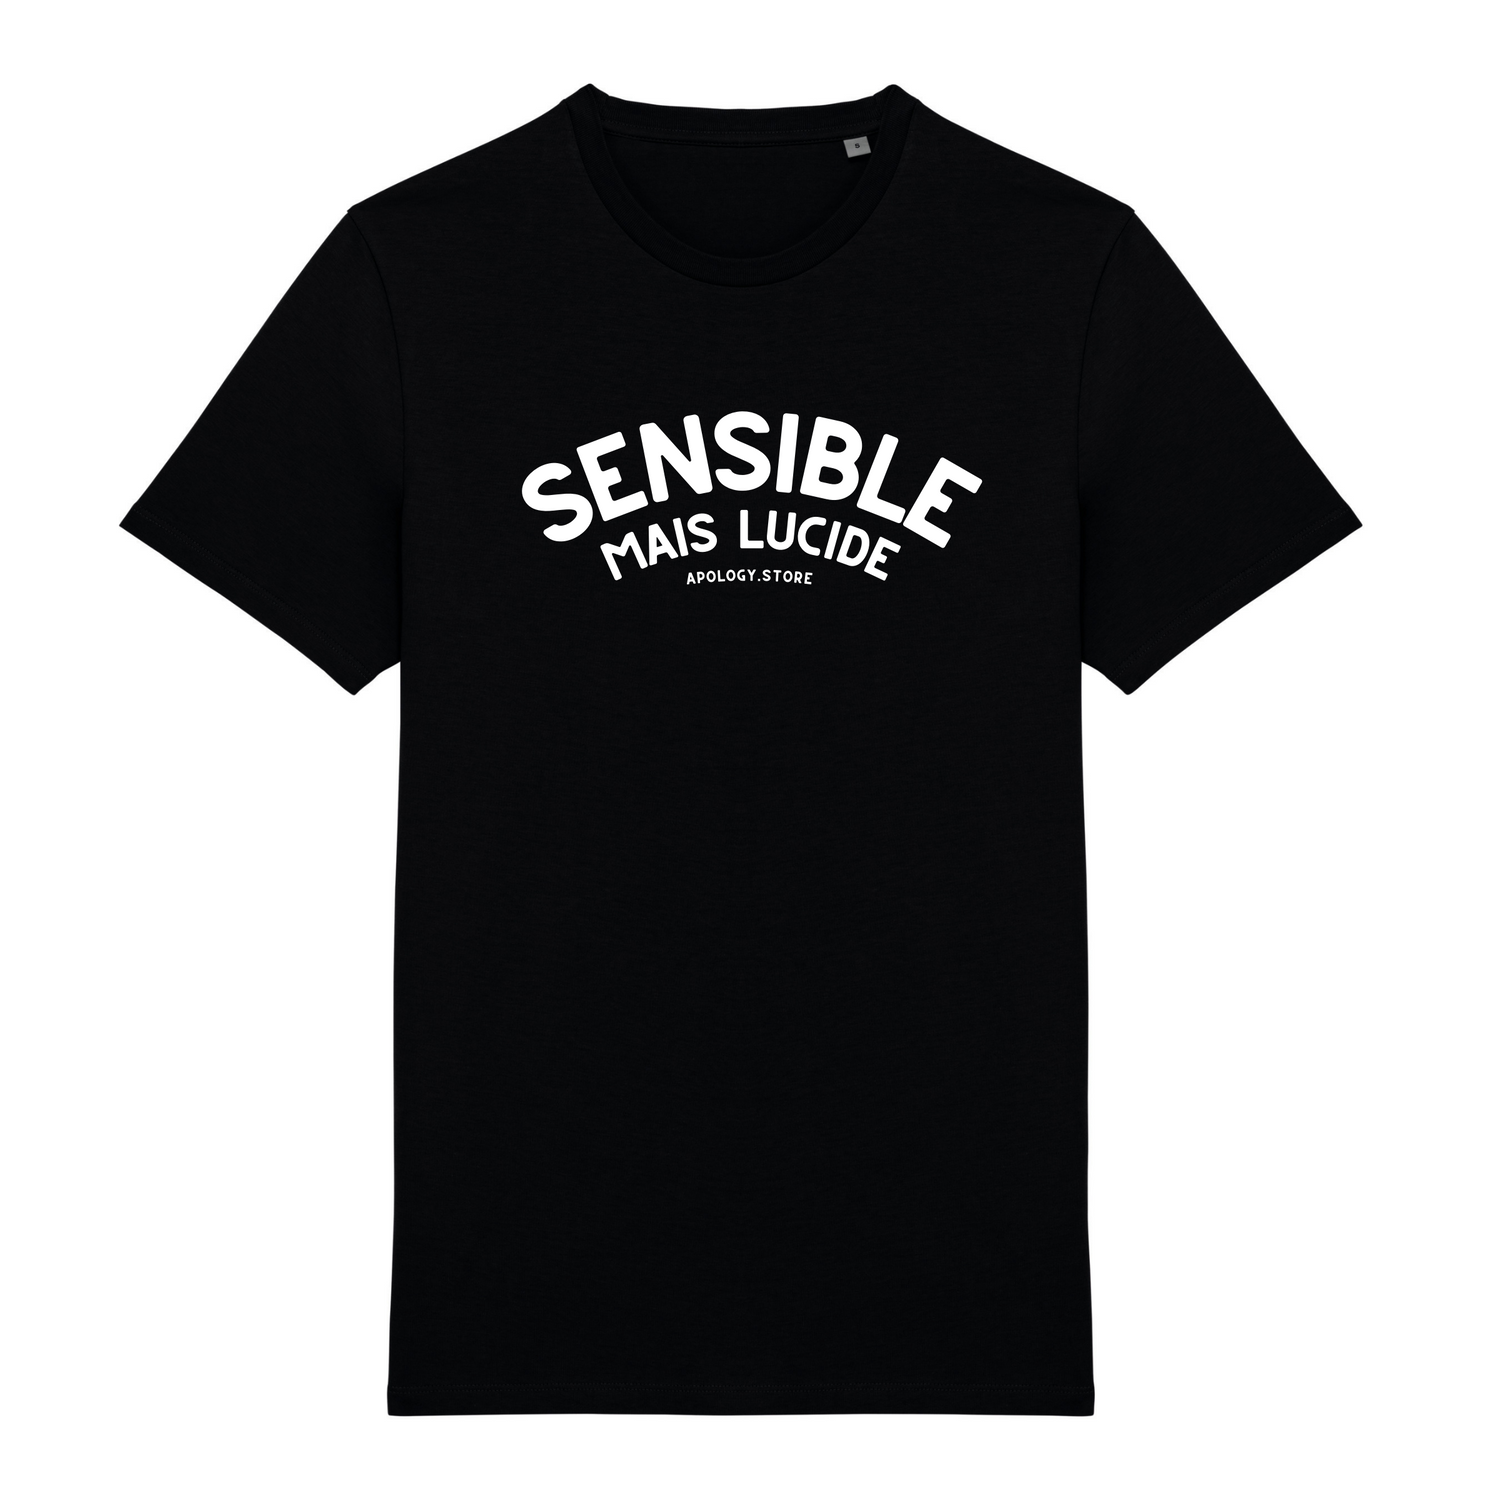 Sensitive but lucid T-shirt - Made in Portugal